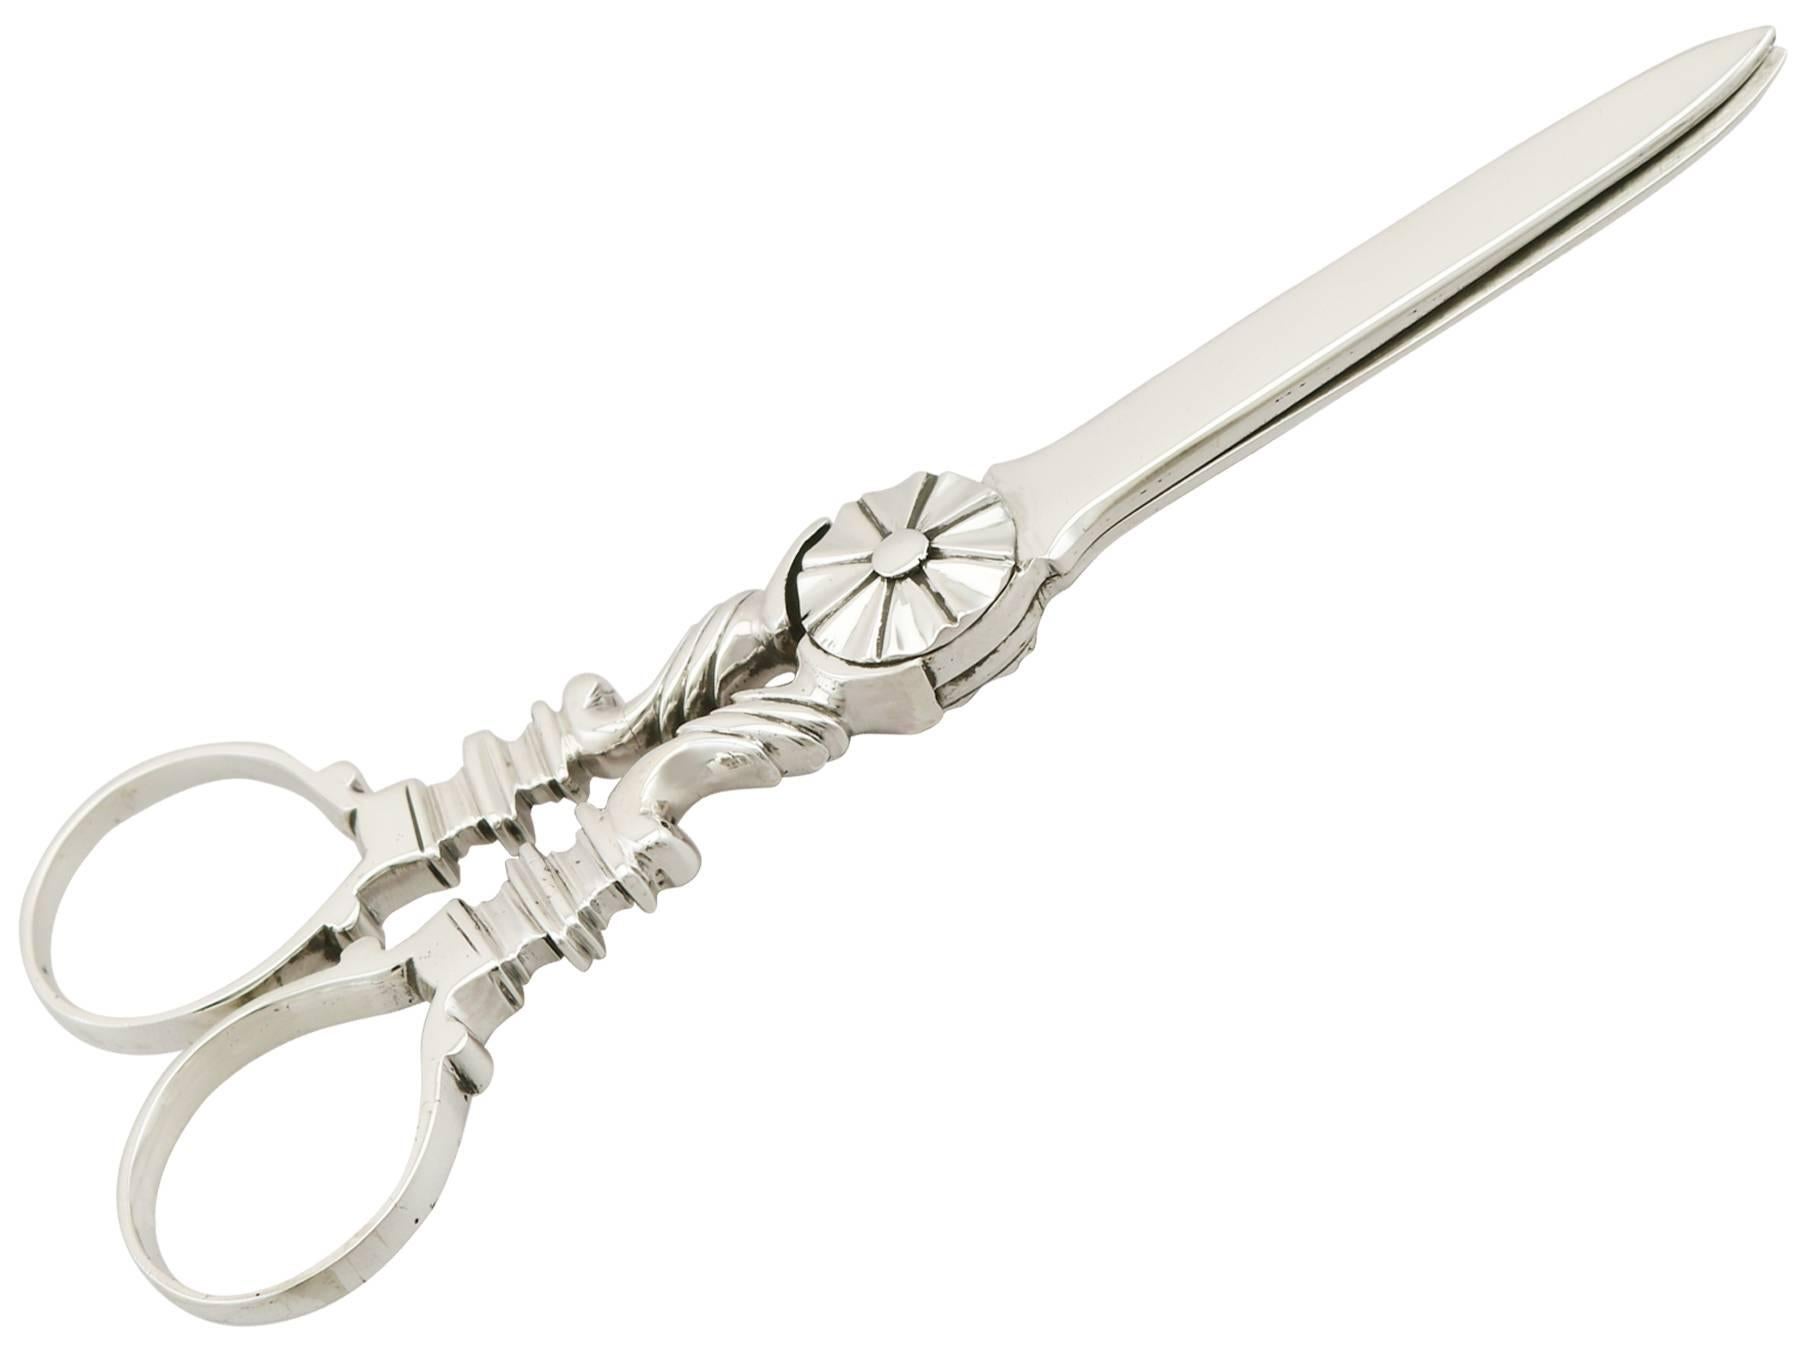 An exceptional, fine and impressive pair of antique George III English sterling silver grape shears; an addition to our silver flatware collection

These exceptional antique George III sterling silver grape shears have a hinged scissor